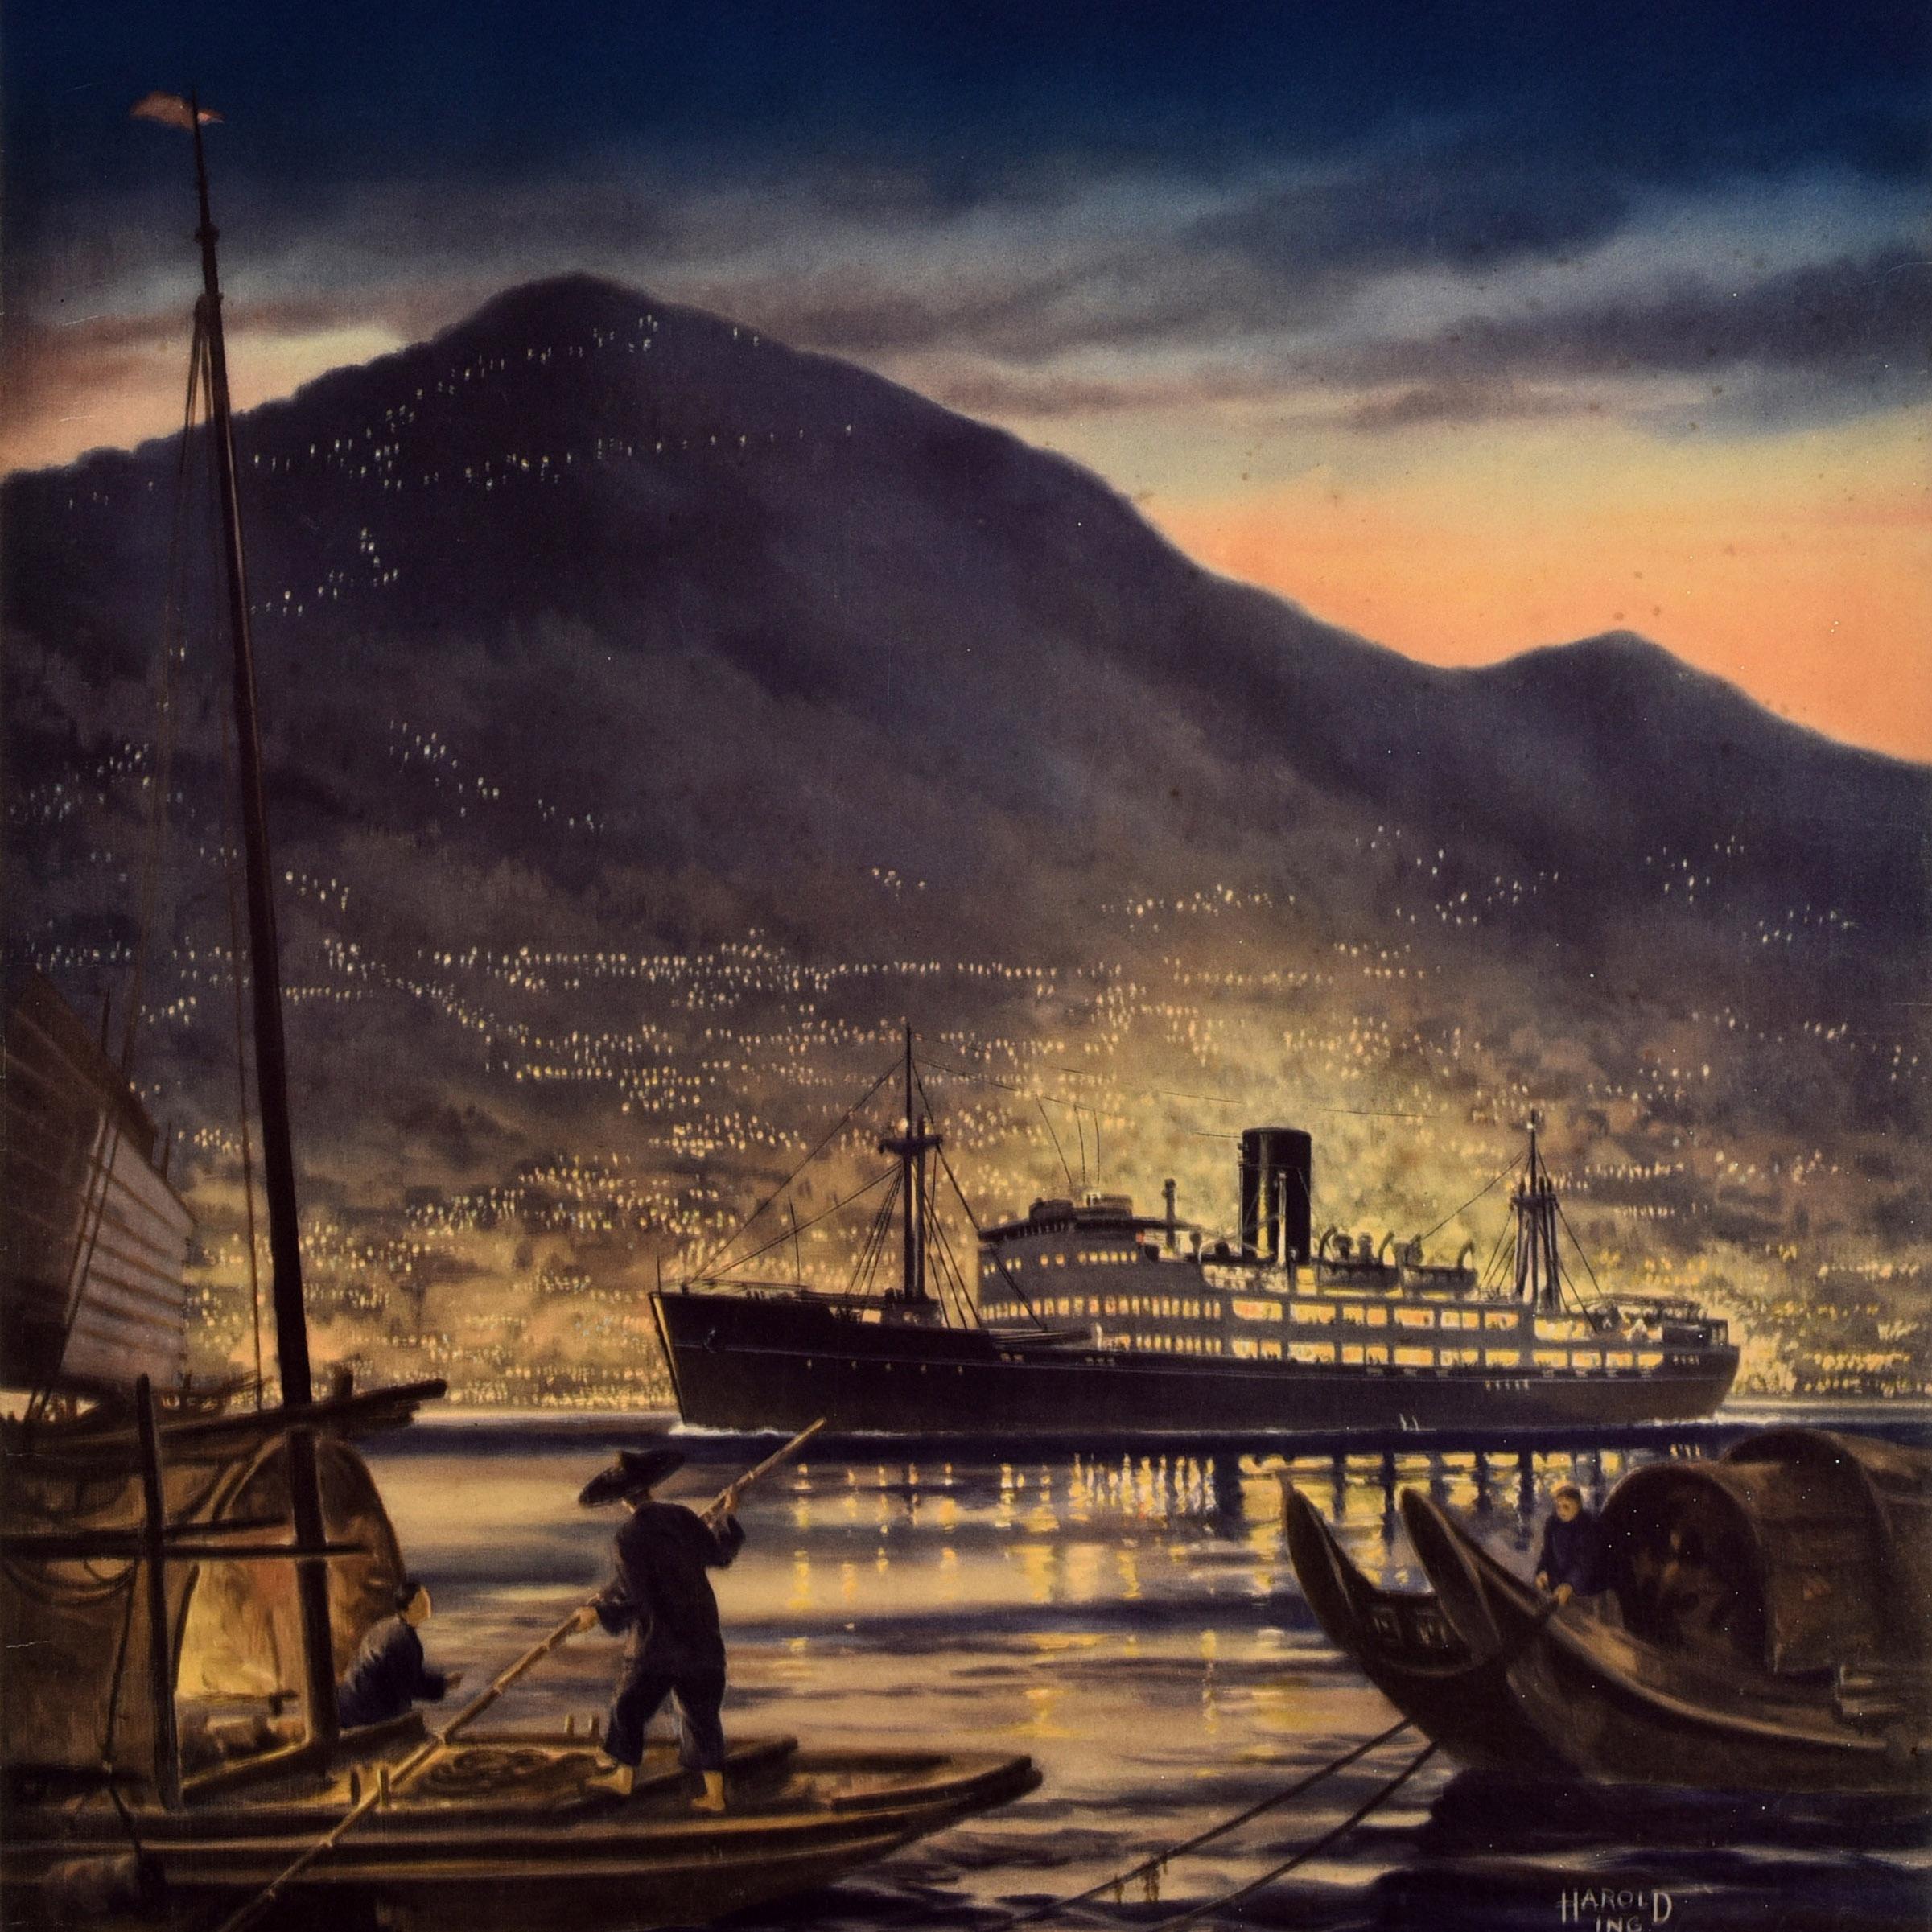 Original vintage cruise travel poster - China Navigation Co Ltd Australia to the Orient By the New British Liners MV Changsha M.V. Taiyuan - featuring a stunning night view by Harold Ing (1900-1973) depicting a ship sailing in a harbour in Asia with